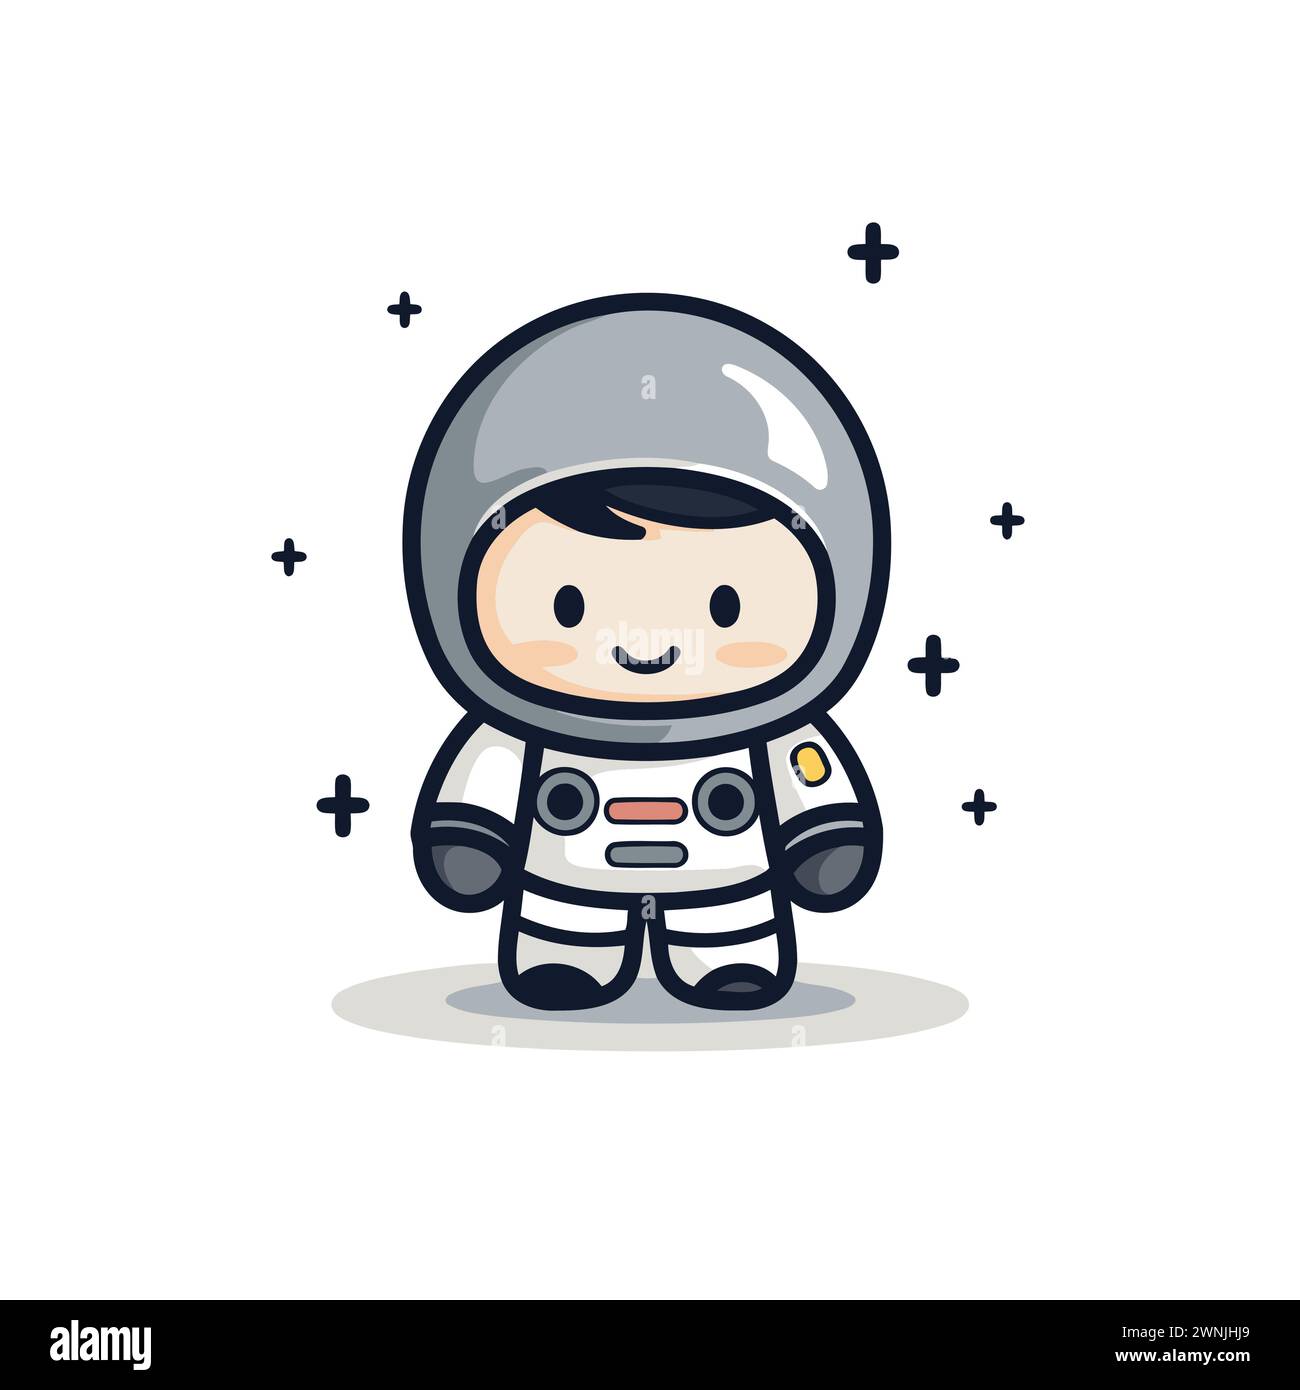 Cute astronaut with space suit. Vector illustration. flat design. Stock Vector